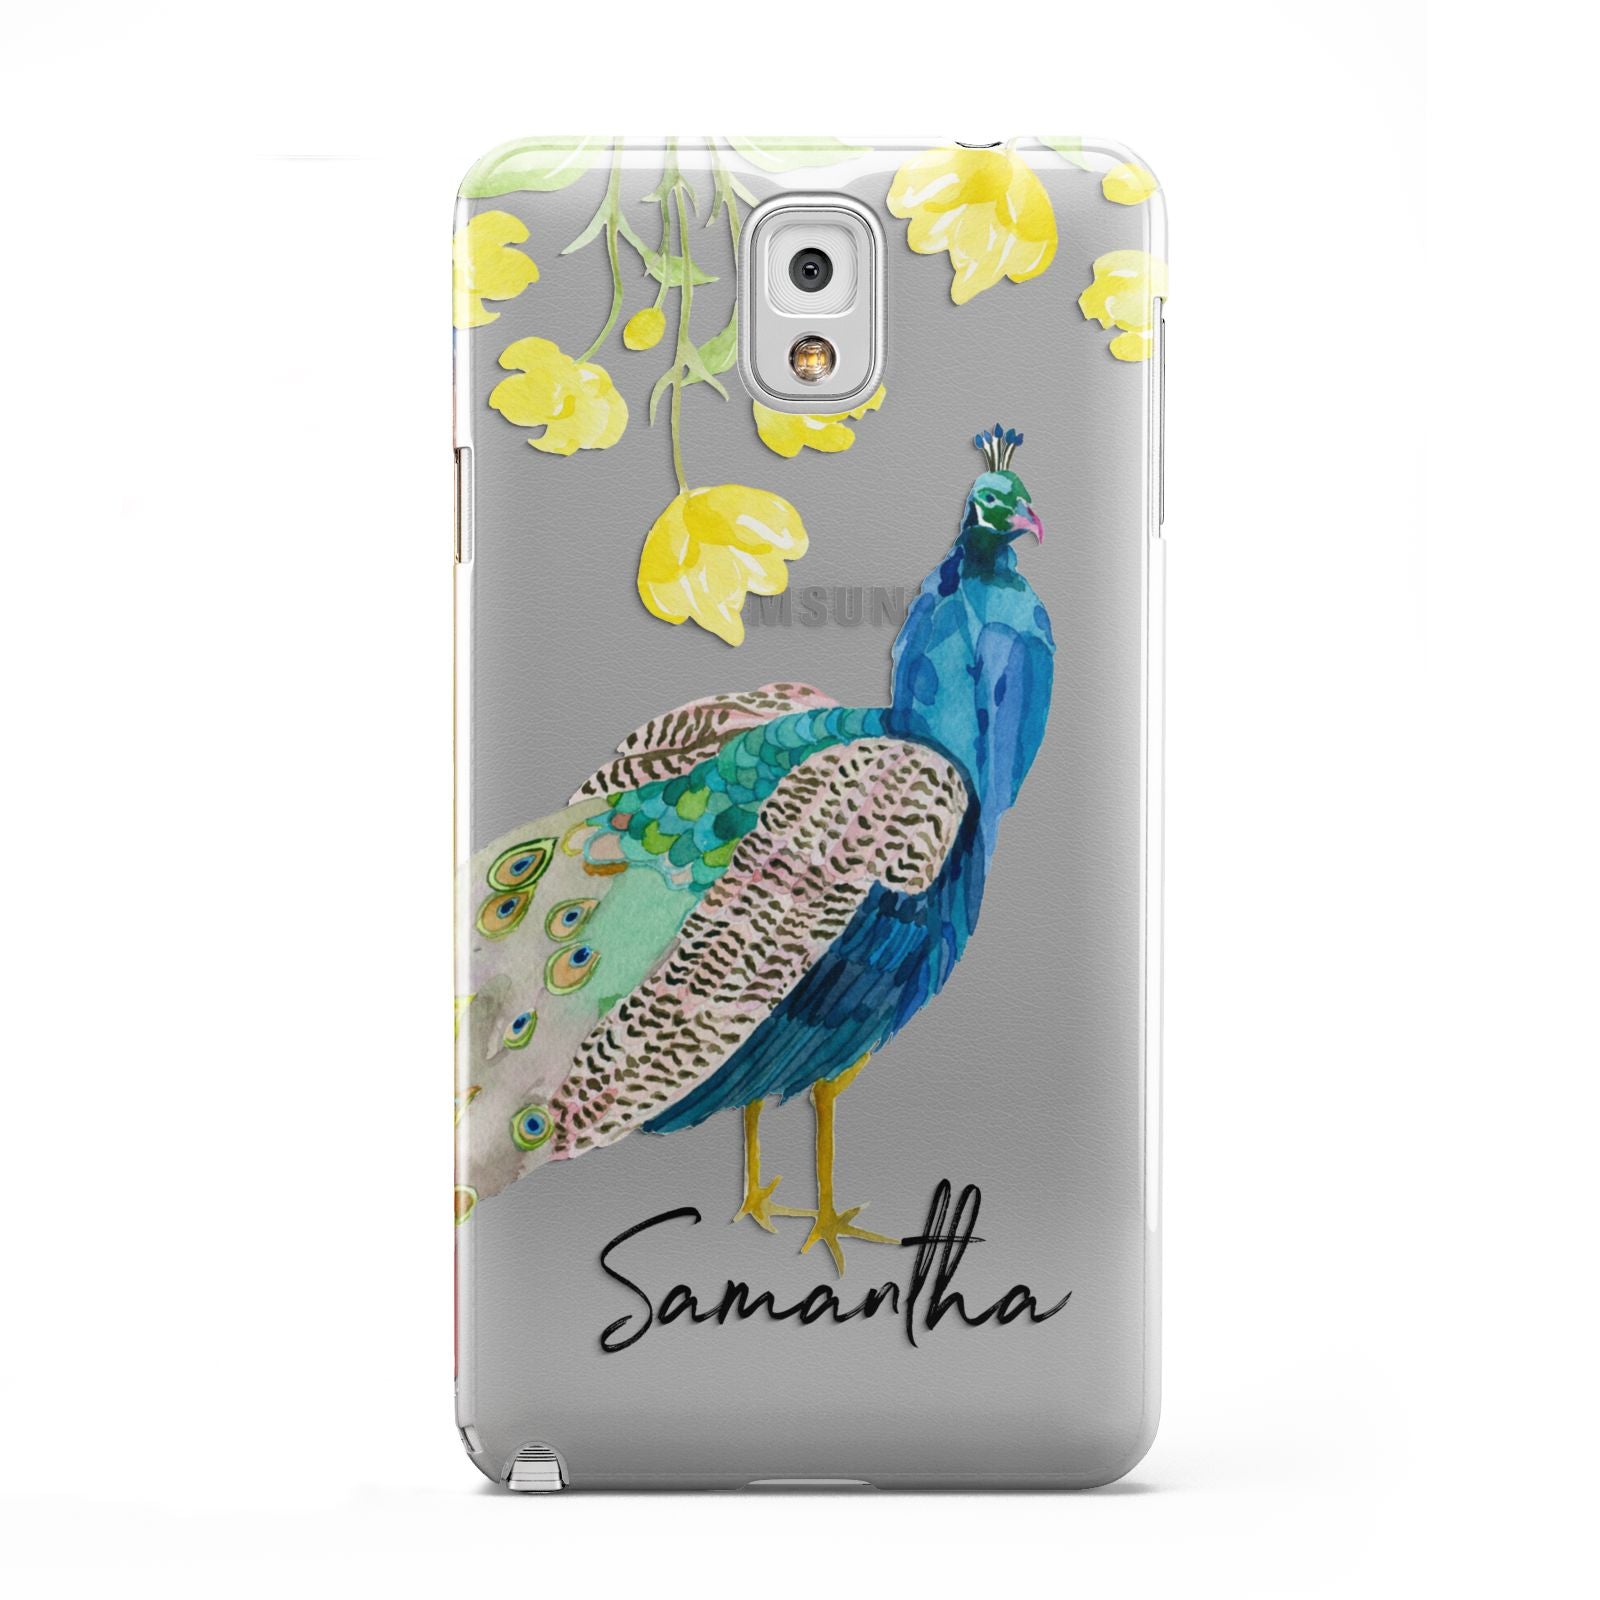 Personalised Peacock Samsung Galaxy Note 3 Case